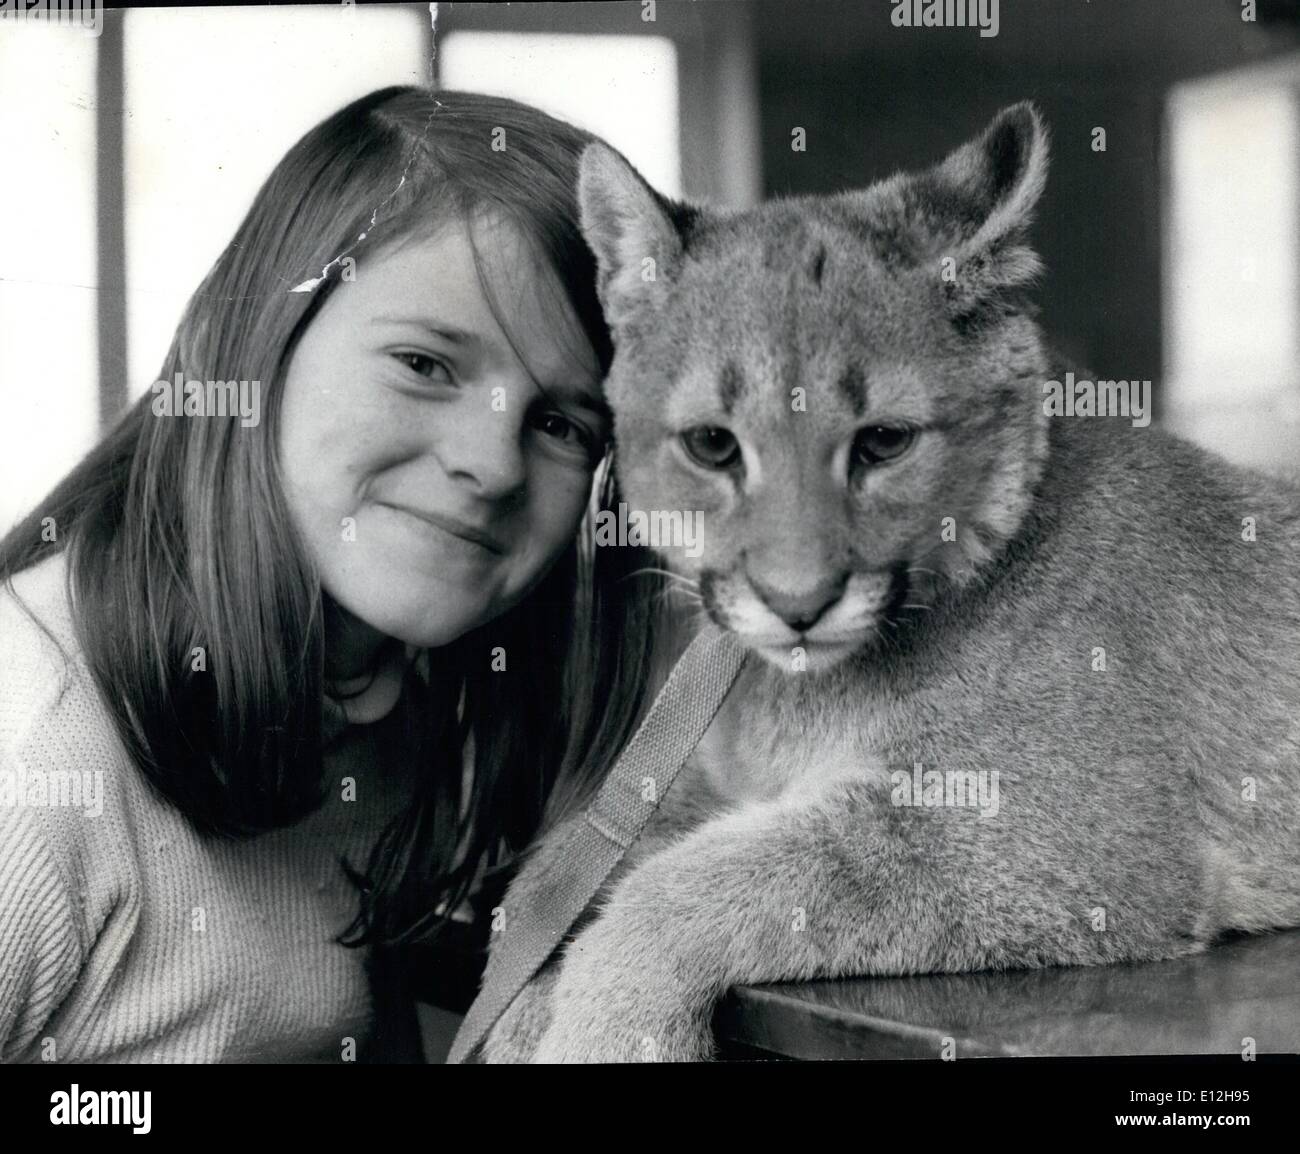 Jan. 10, 2012 - Sheba the 6 month old puma with Julie Hurst aged 12. Inseparable companions. ne Pictures Stock Photo